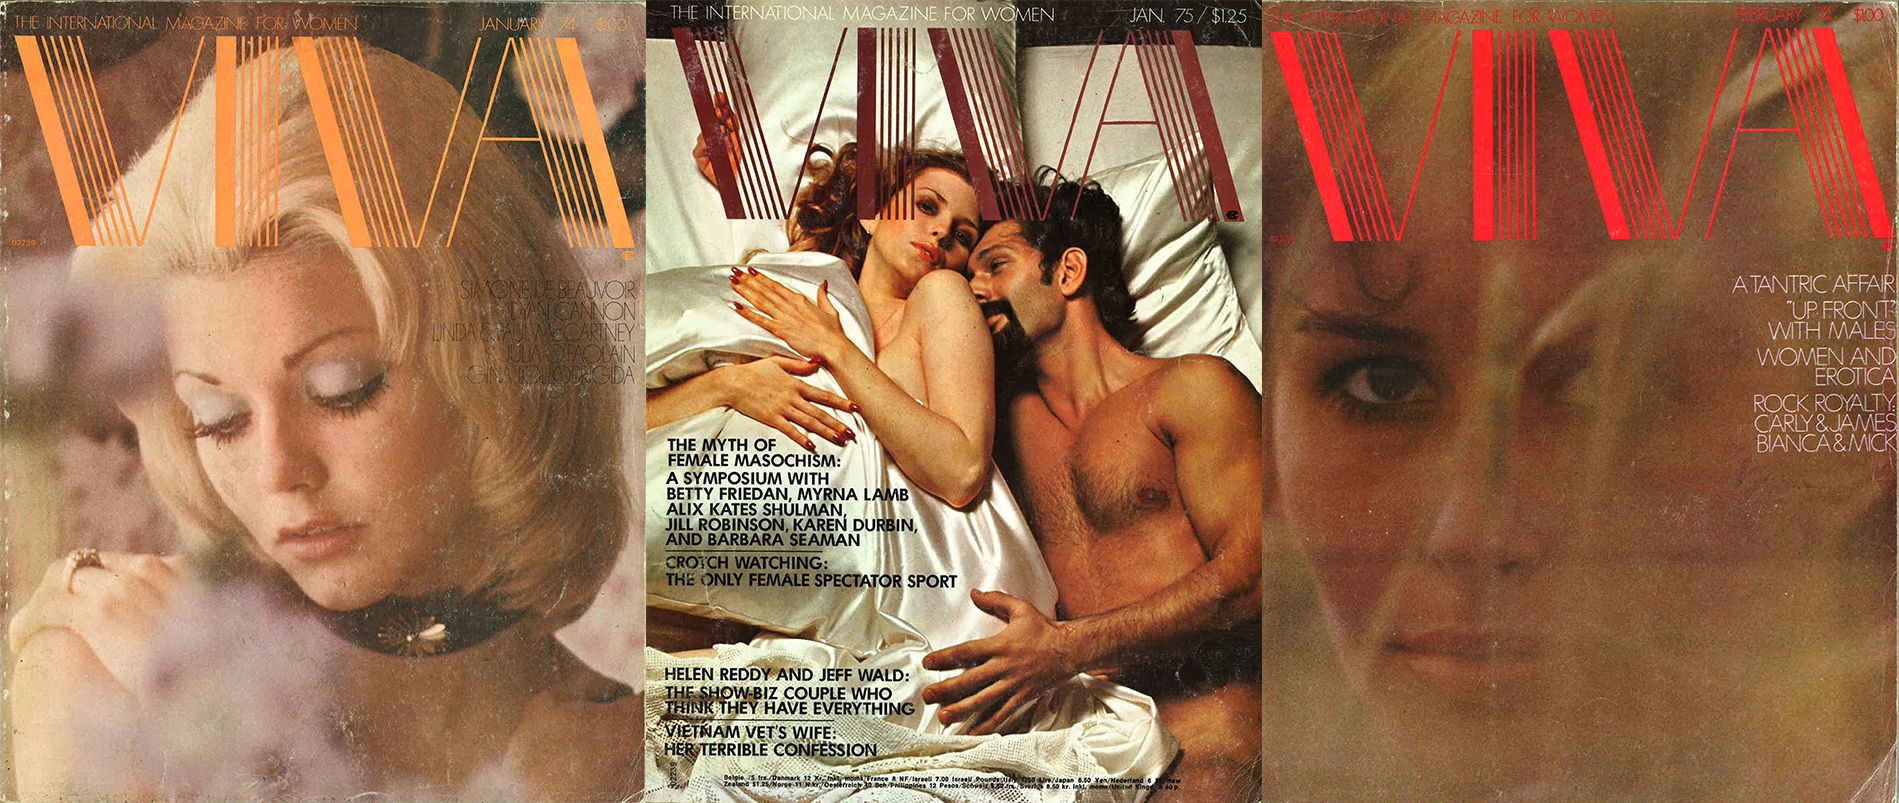 Beach Naked People Running - An Oral History of Viva, the '70s Porn Magazine for Women